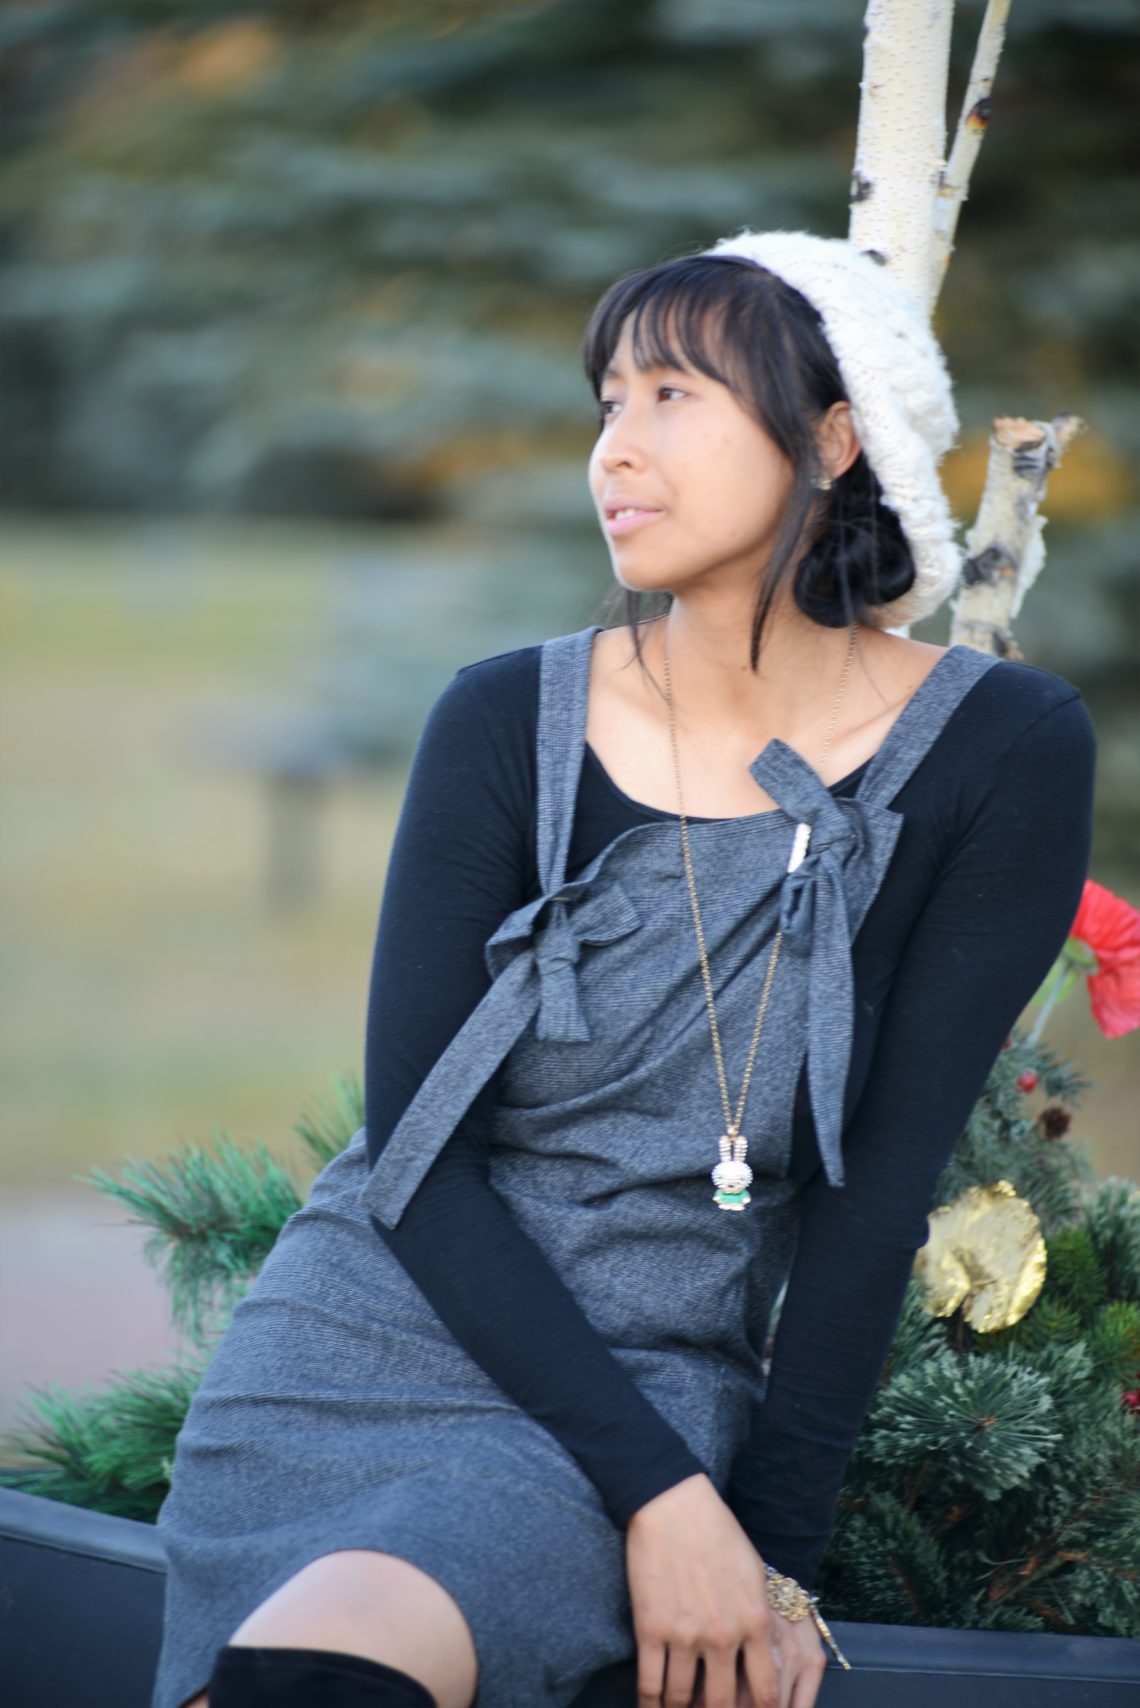 Thanh wearing a refashioned dress from pants, as well as knee high boots, black top and a hat.